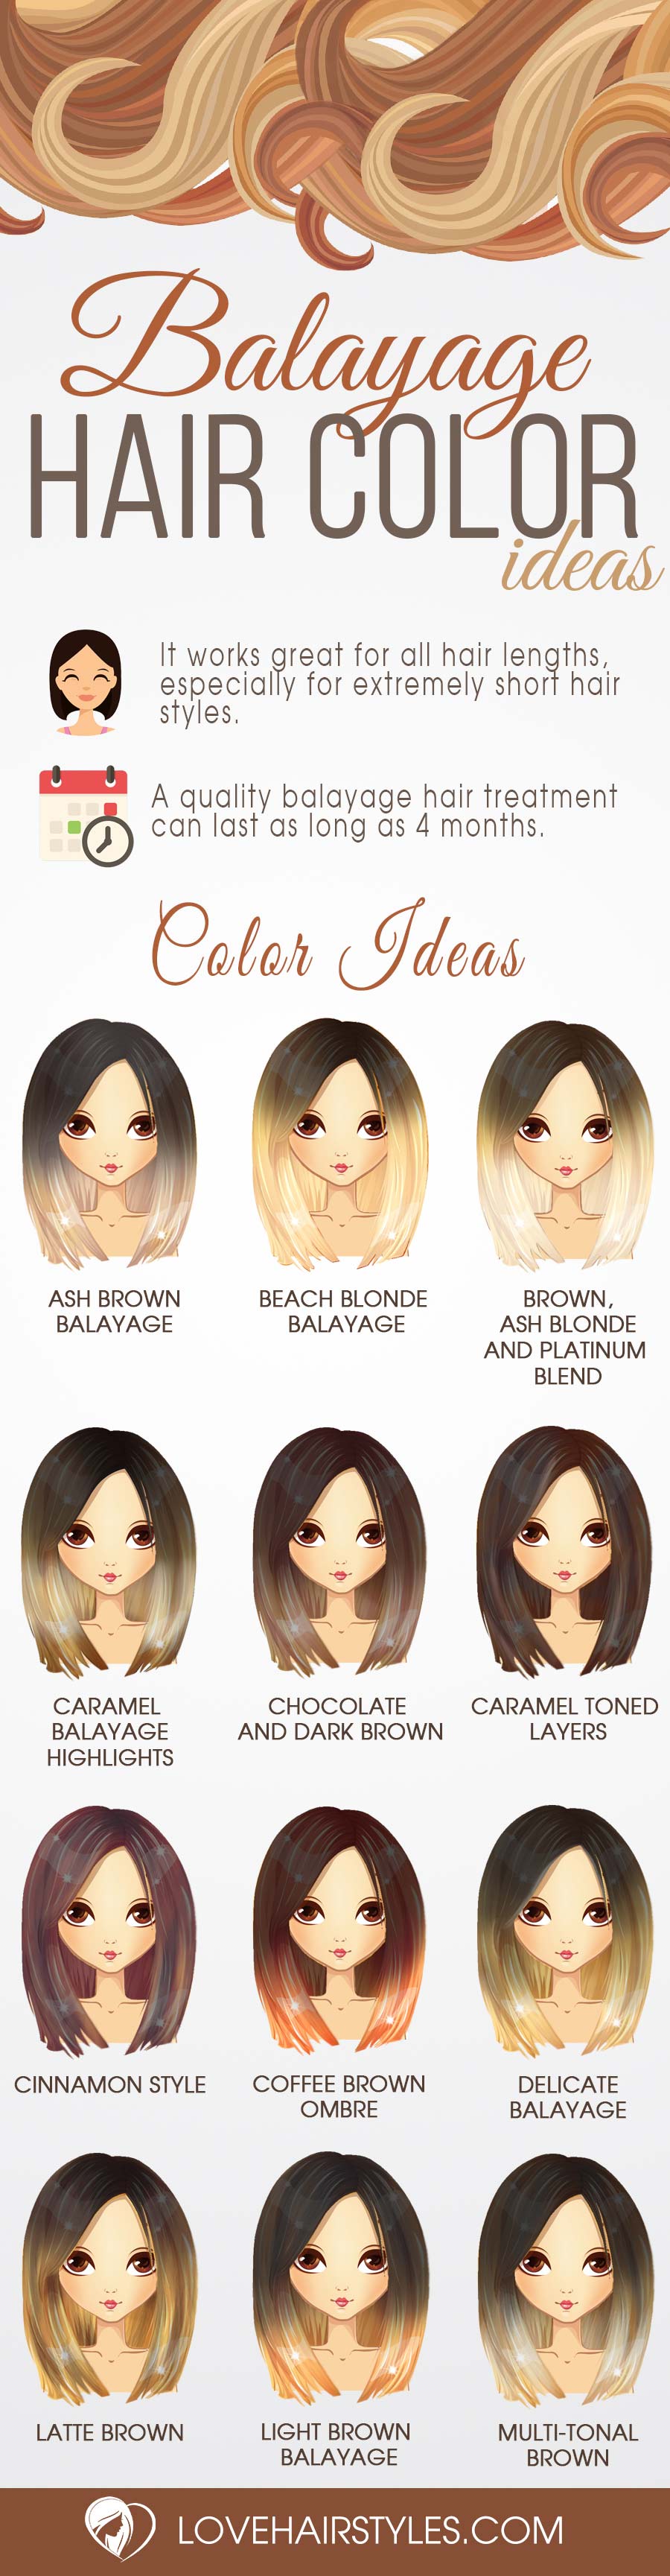 Balayage Hair Color Ideas in Brown to Caramel Tones